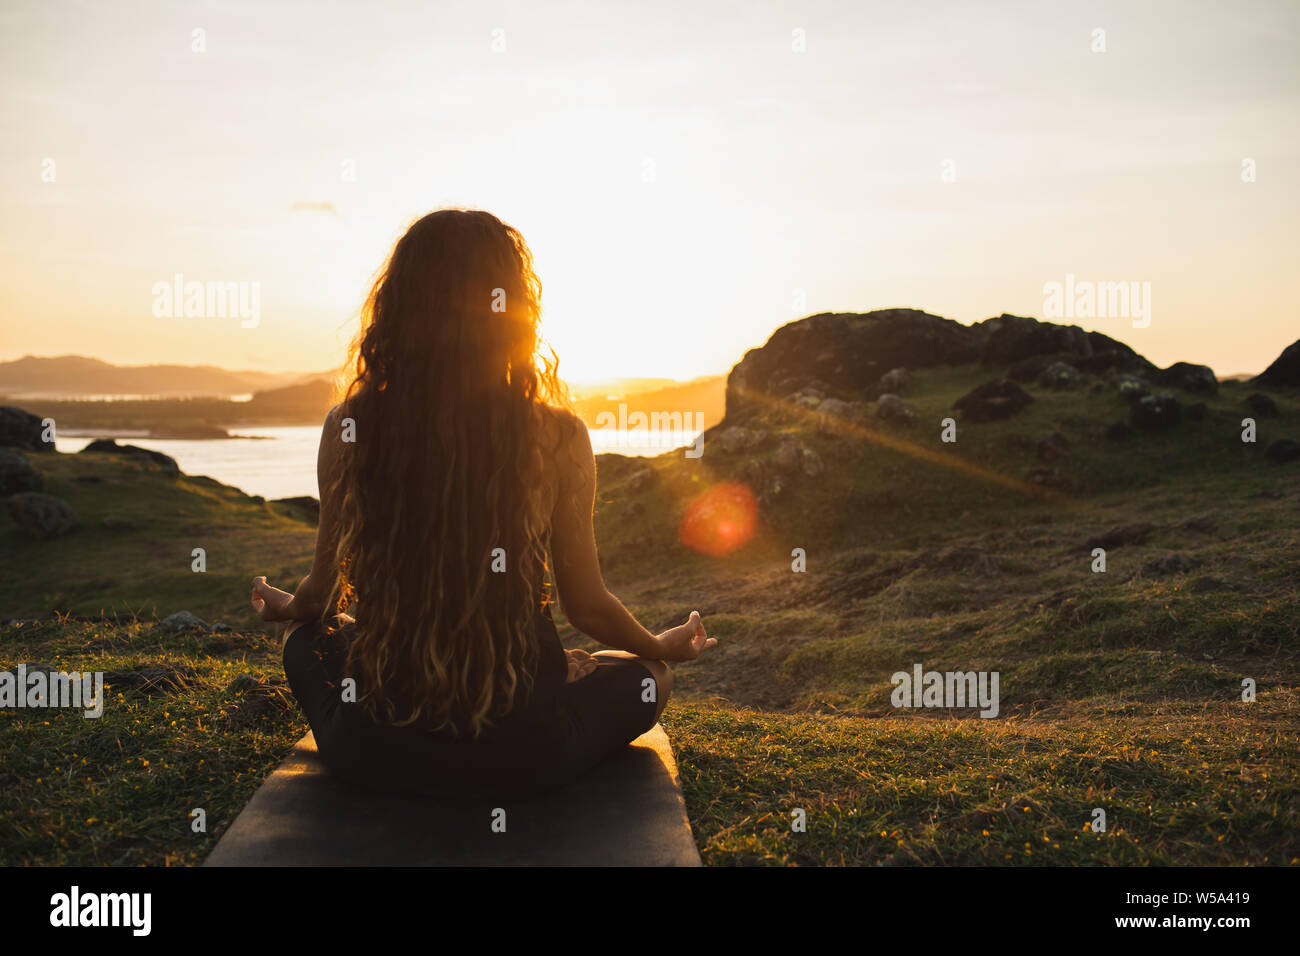 Woman meditating yoga alone at sunrise mountains. View from behind. Travel Lifestyle spiritual relaxation concept. Harmony with nature. Stock Photo